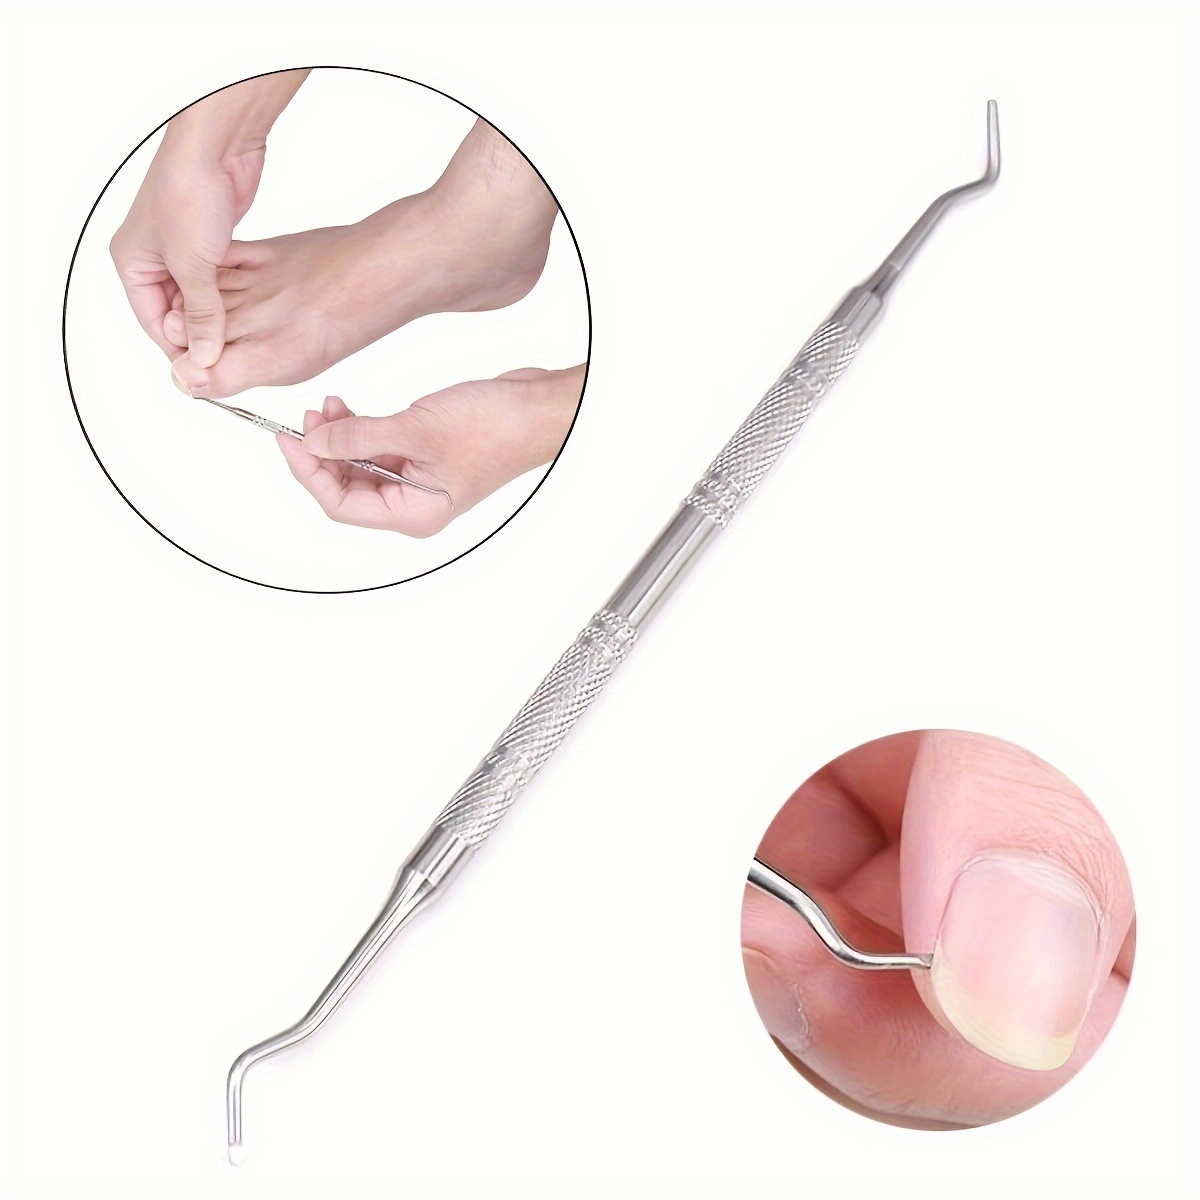 

1pc Ingrown Toe Nail Lifter File, Nail Correction Tool, Dual Double Ended Sided Pedicure Tool, Foot Nail Care Manicure Tools